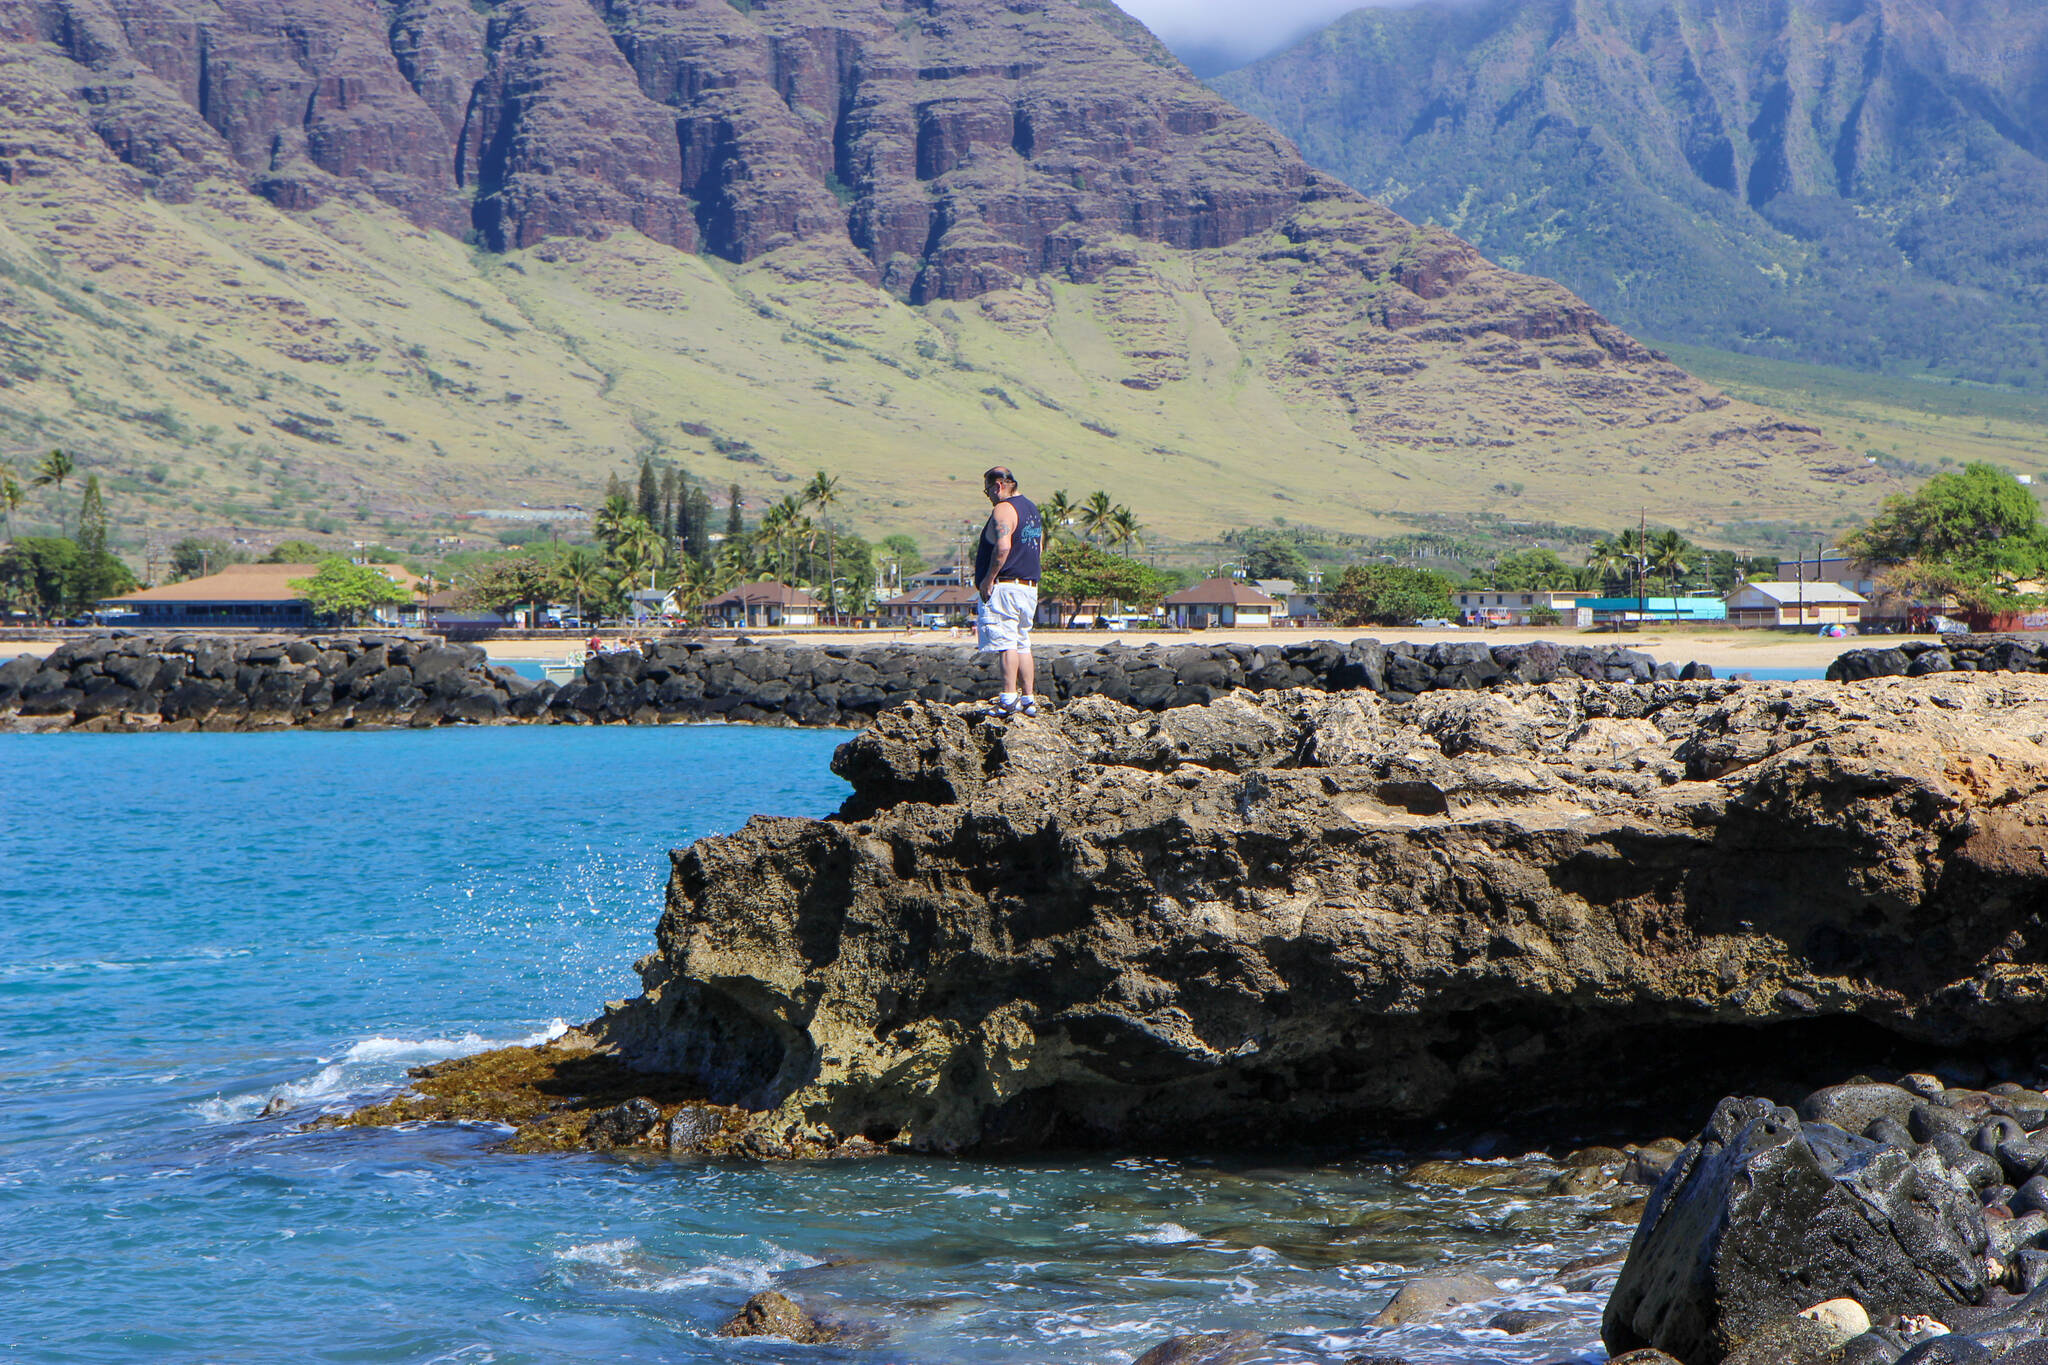 Natural Resources Coordinator for OVK, Justin McDonald, spends his time at Pokai Bay with the waters of the Waianae Coast. (Courtesy Photo / Lauren Tanel)